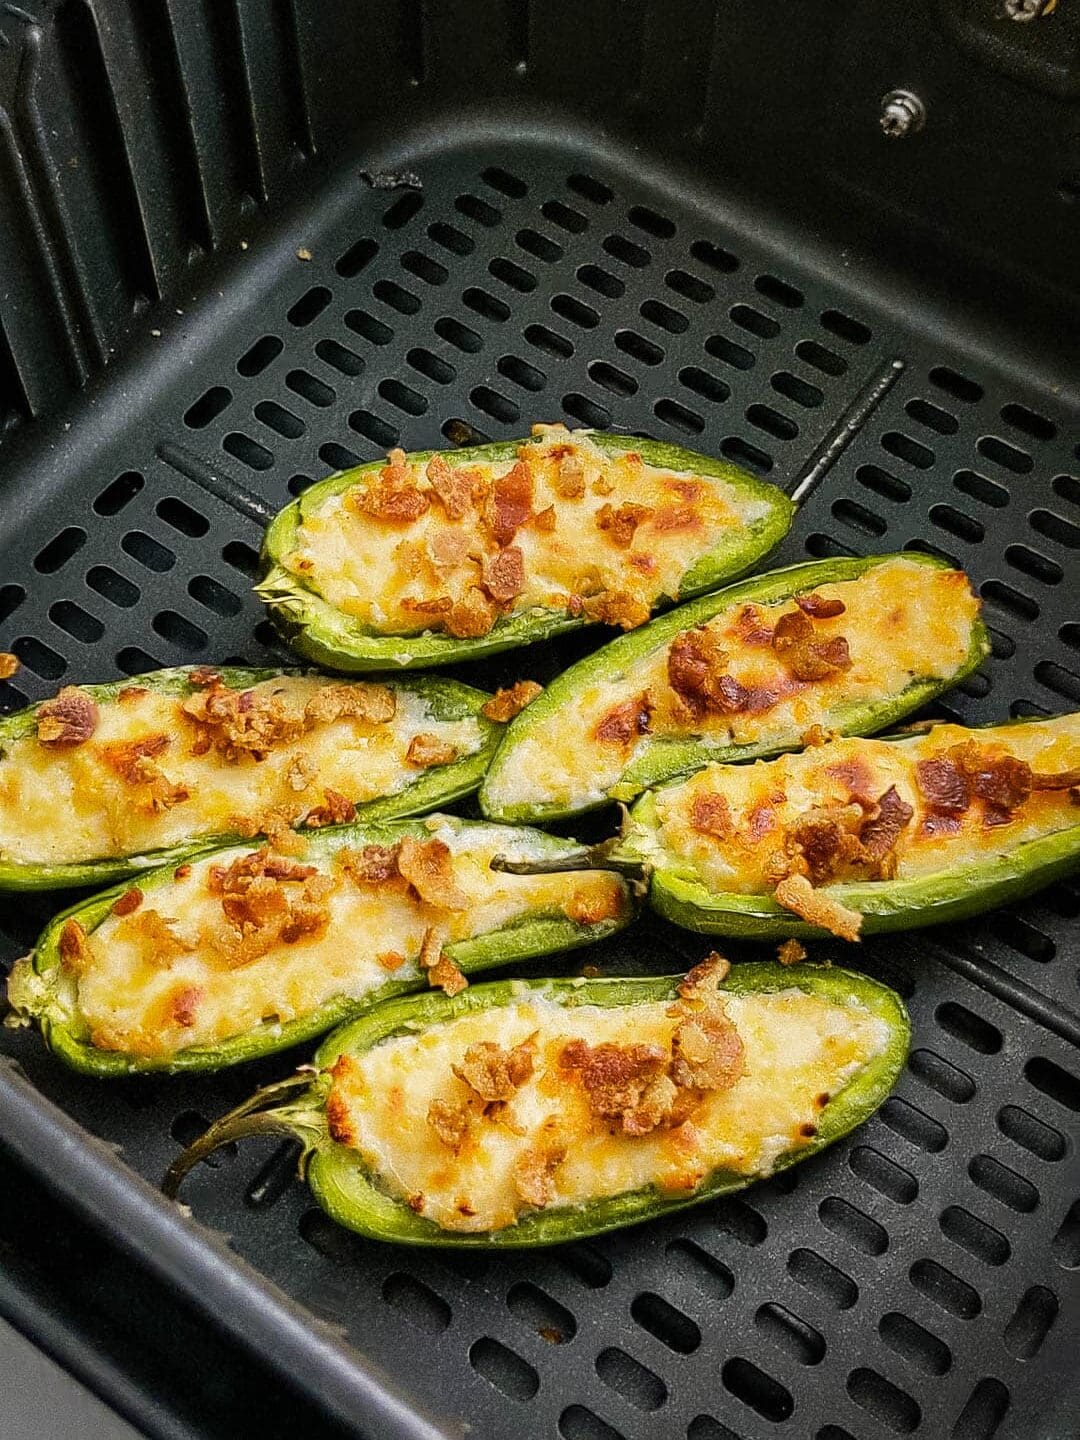 Cooked jalapeno poppers in air fryer basket.